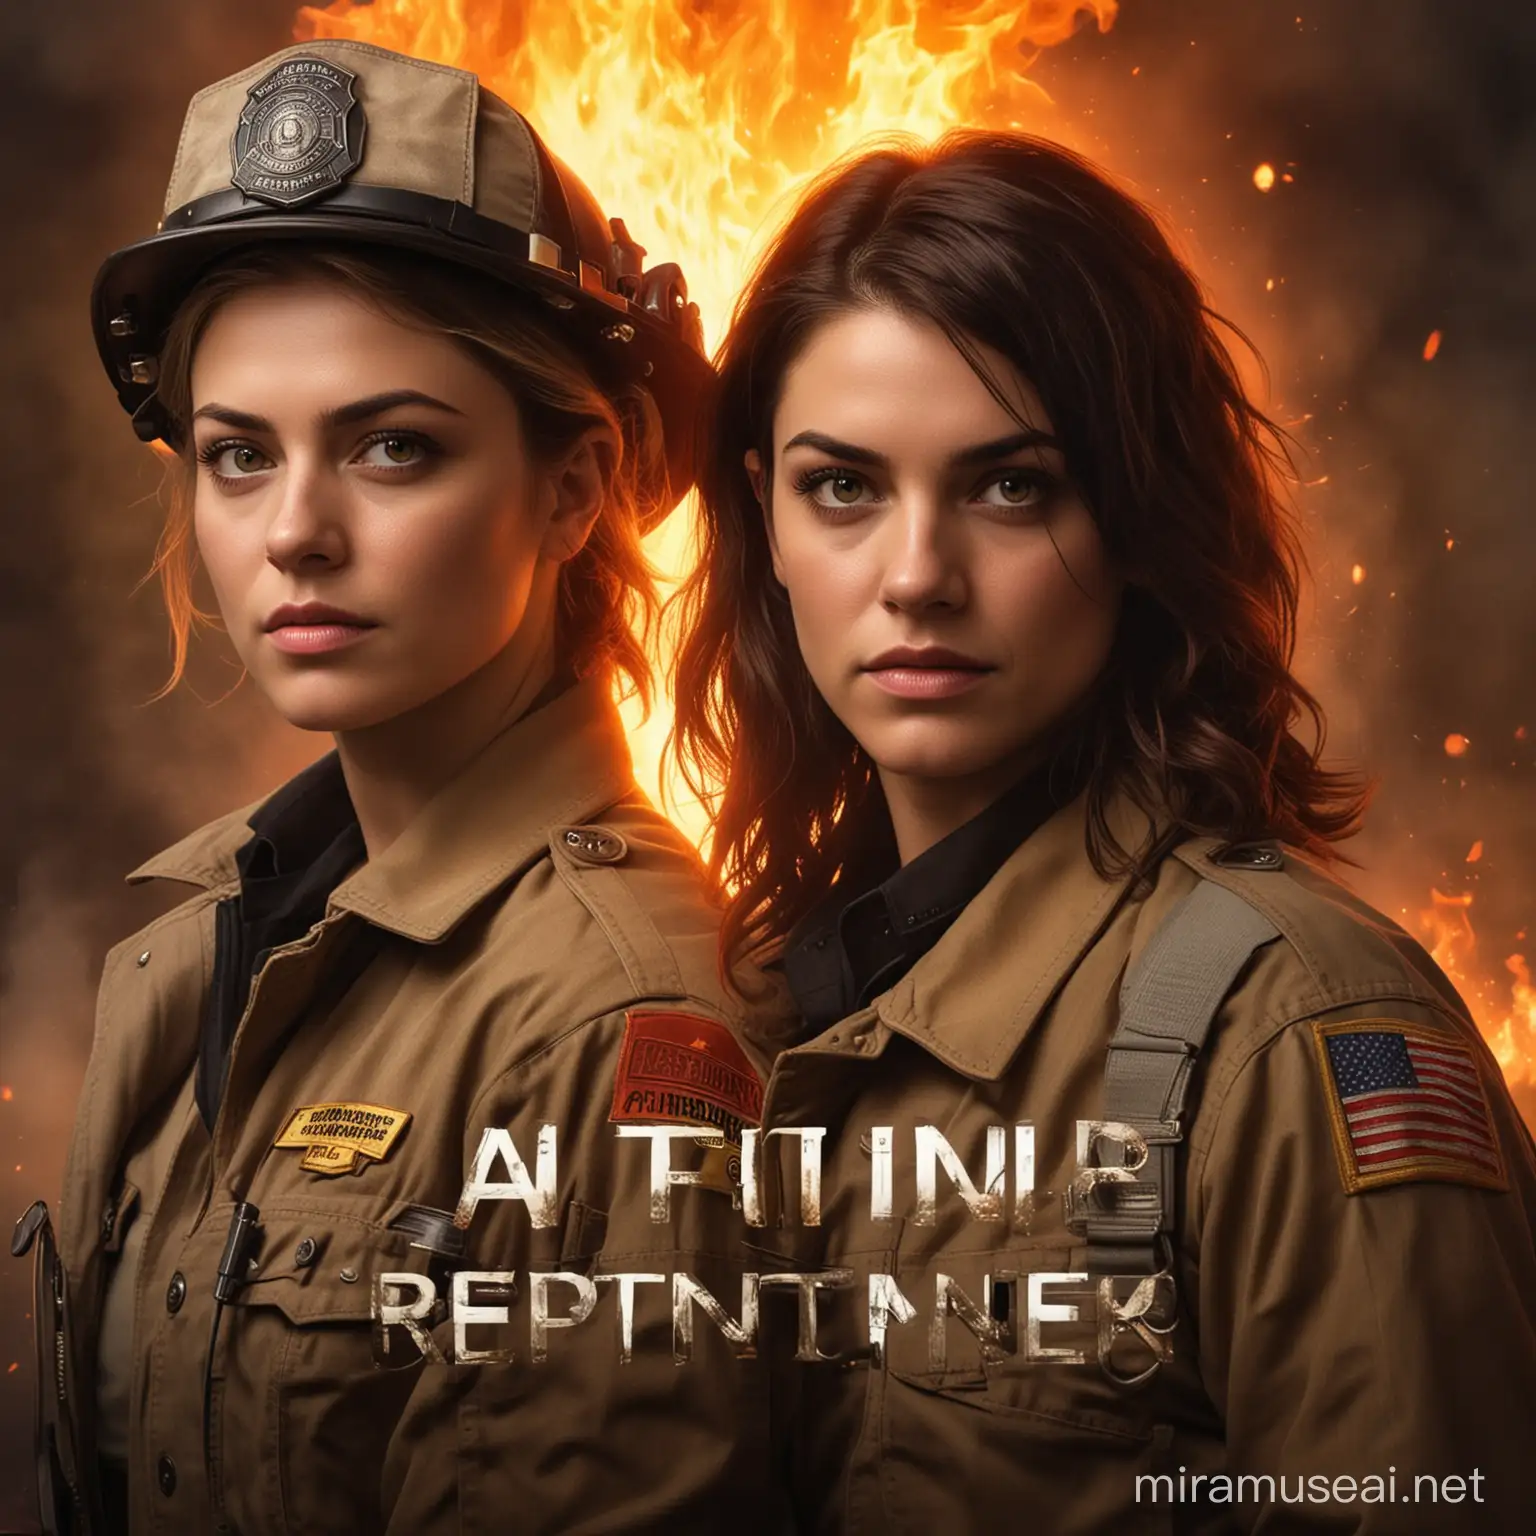 Lesbian Thriller Detective and Fire Captain Uncover Arsonist